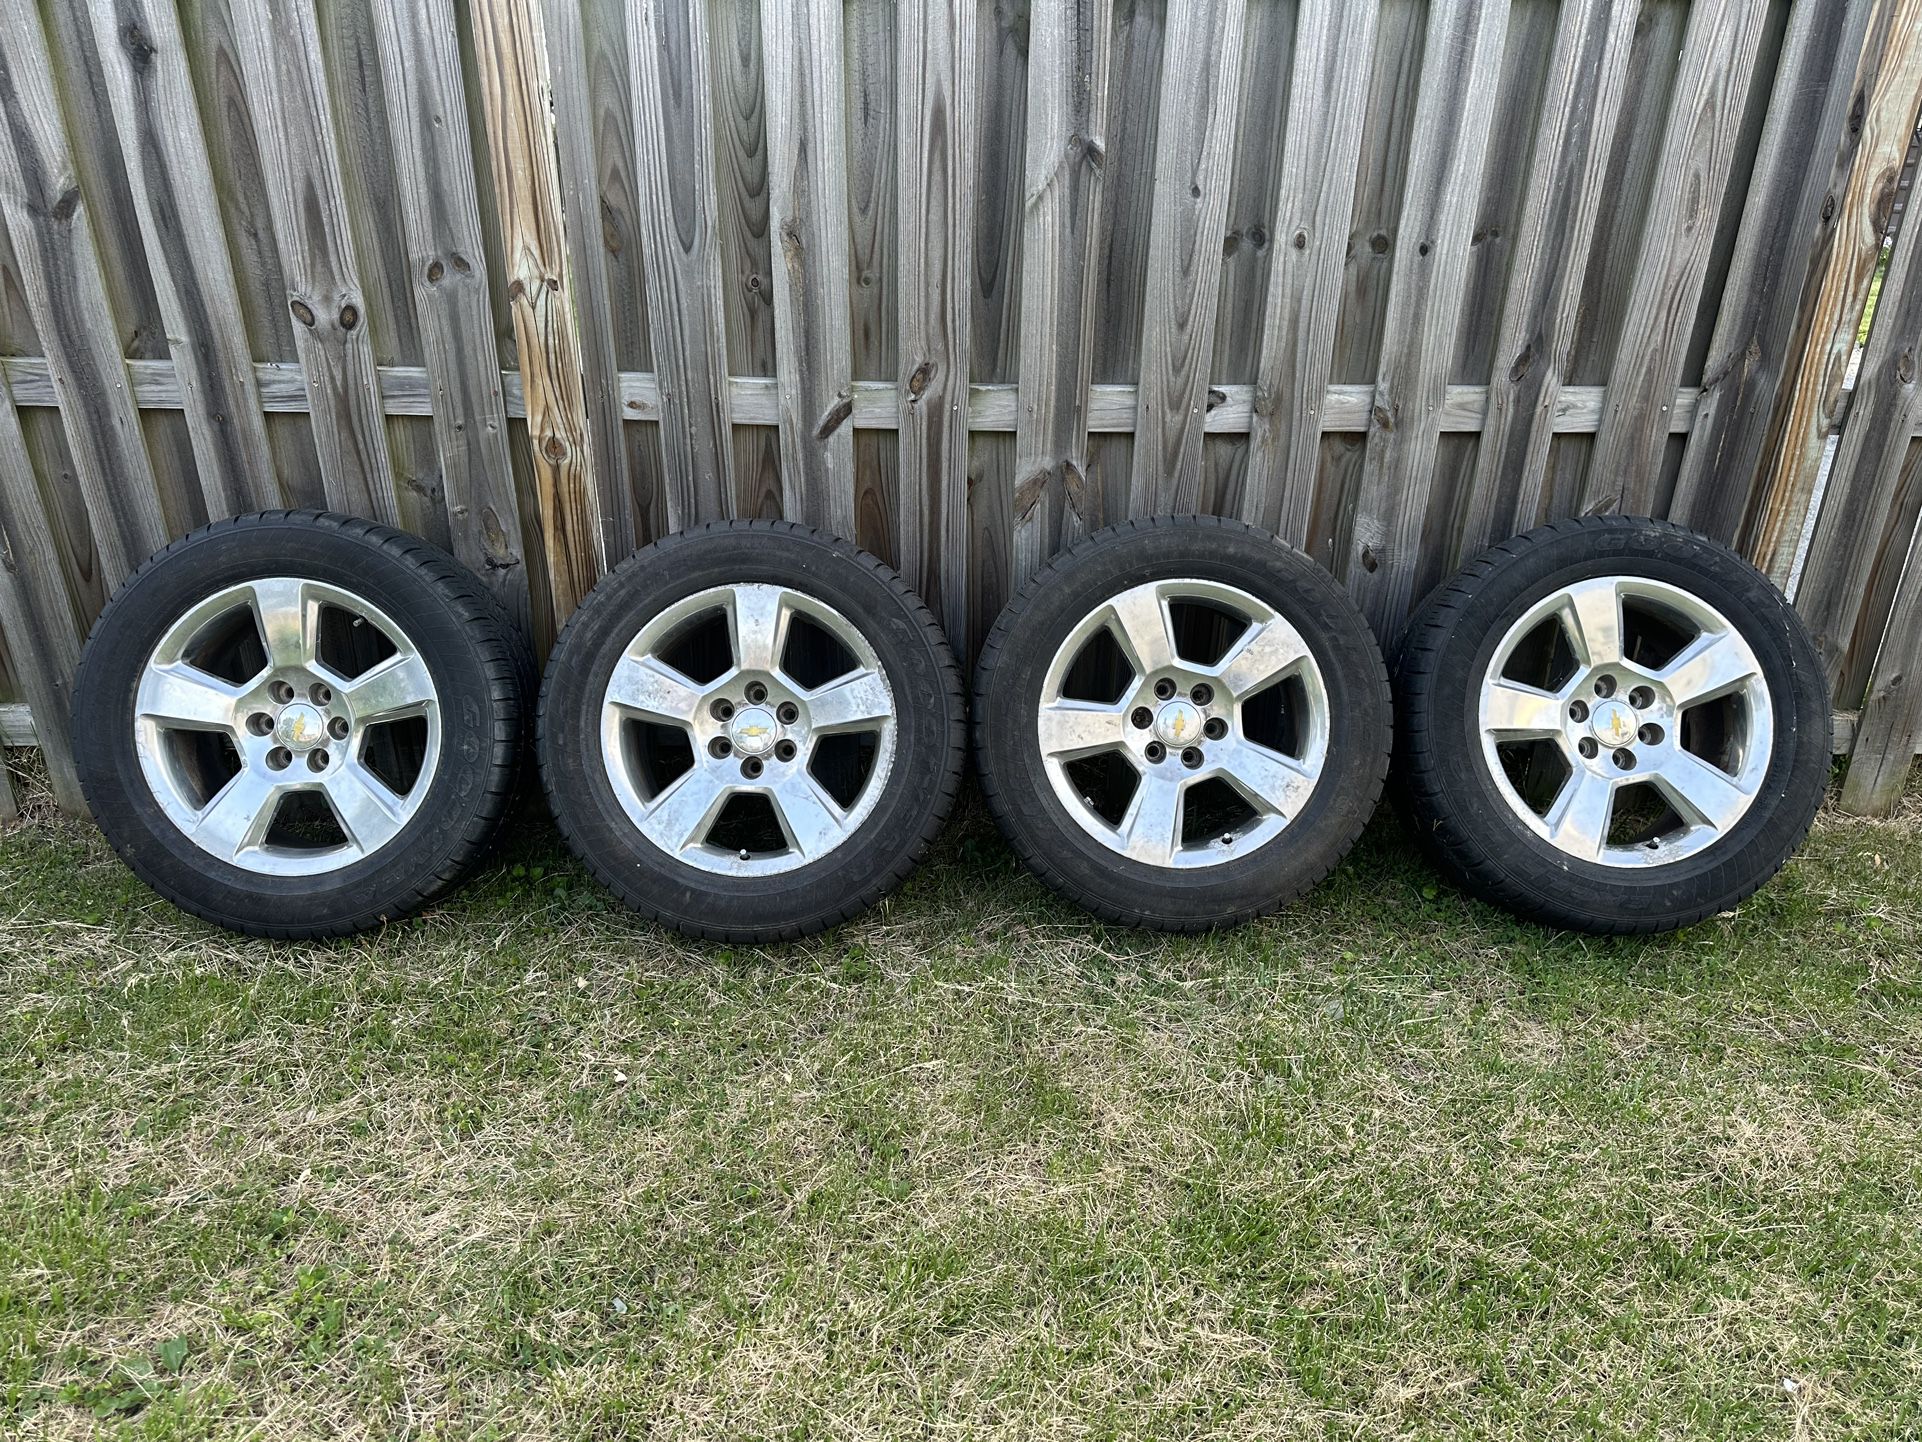 Used with tires 20" Chevy Silverado Tahoe Surburban OEM wheels rims tires 5(contact info removed)-2022